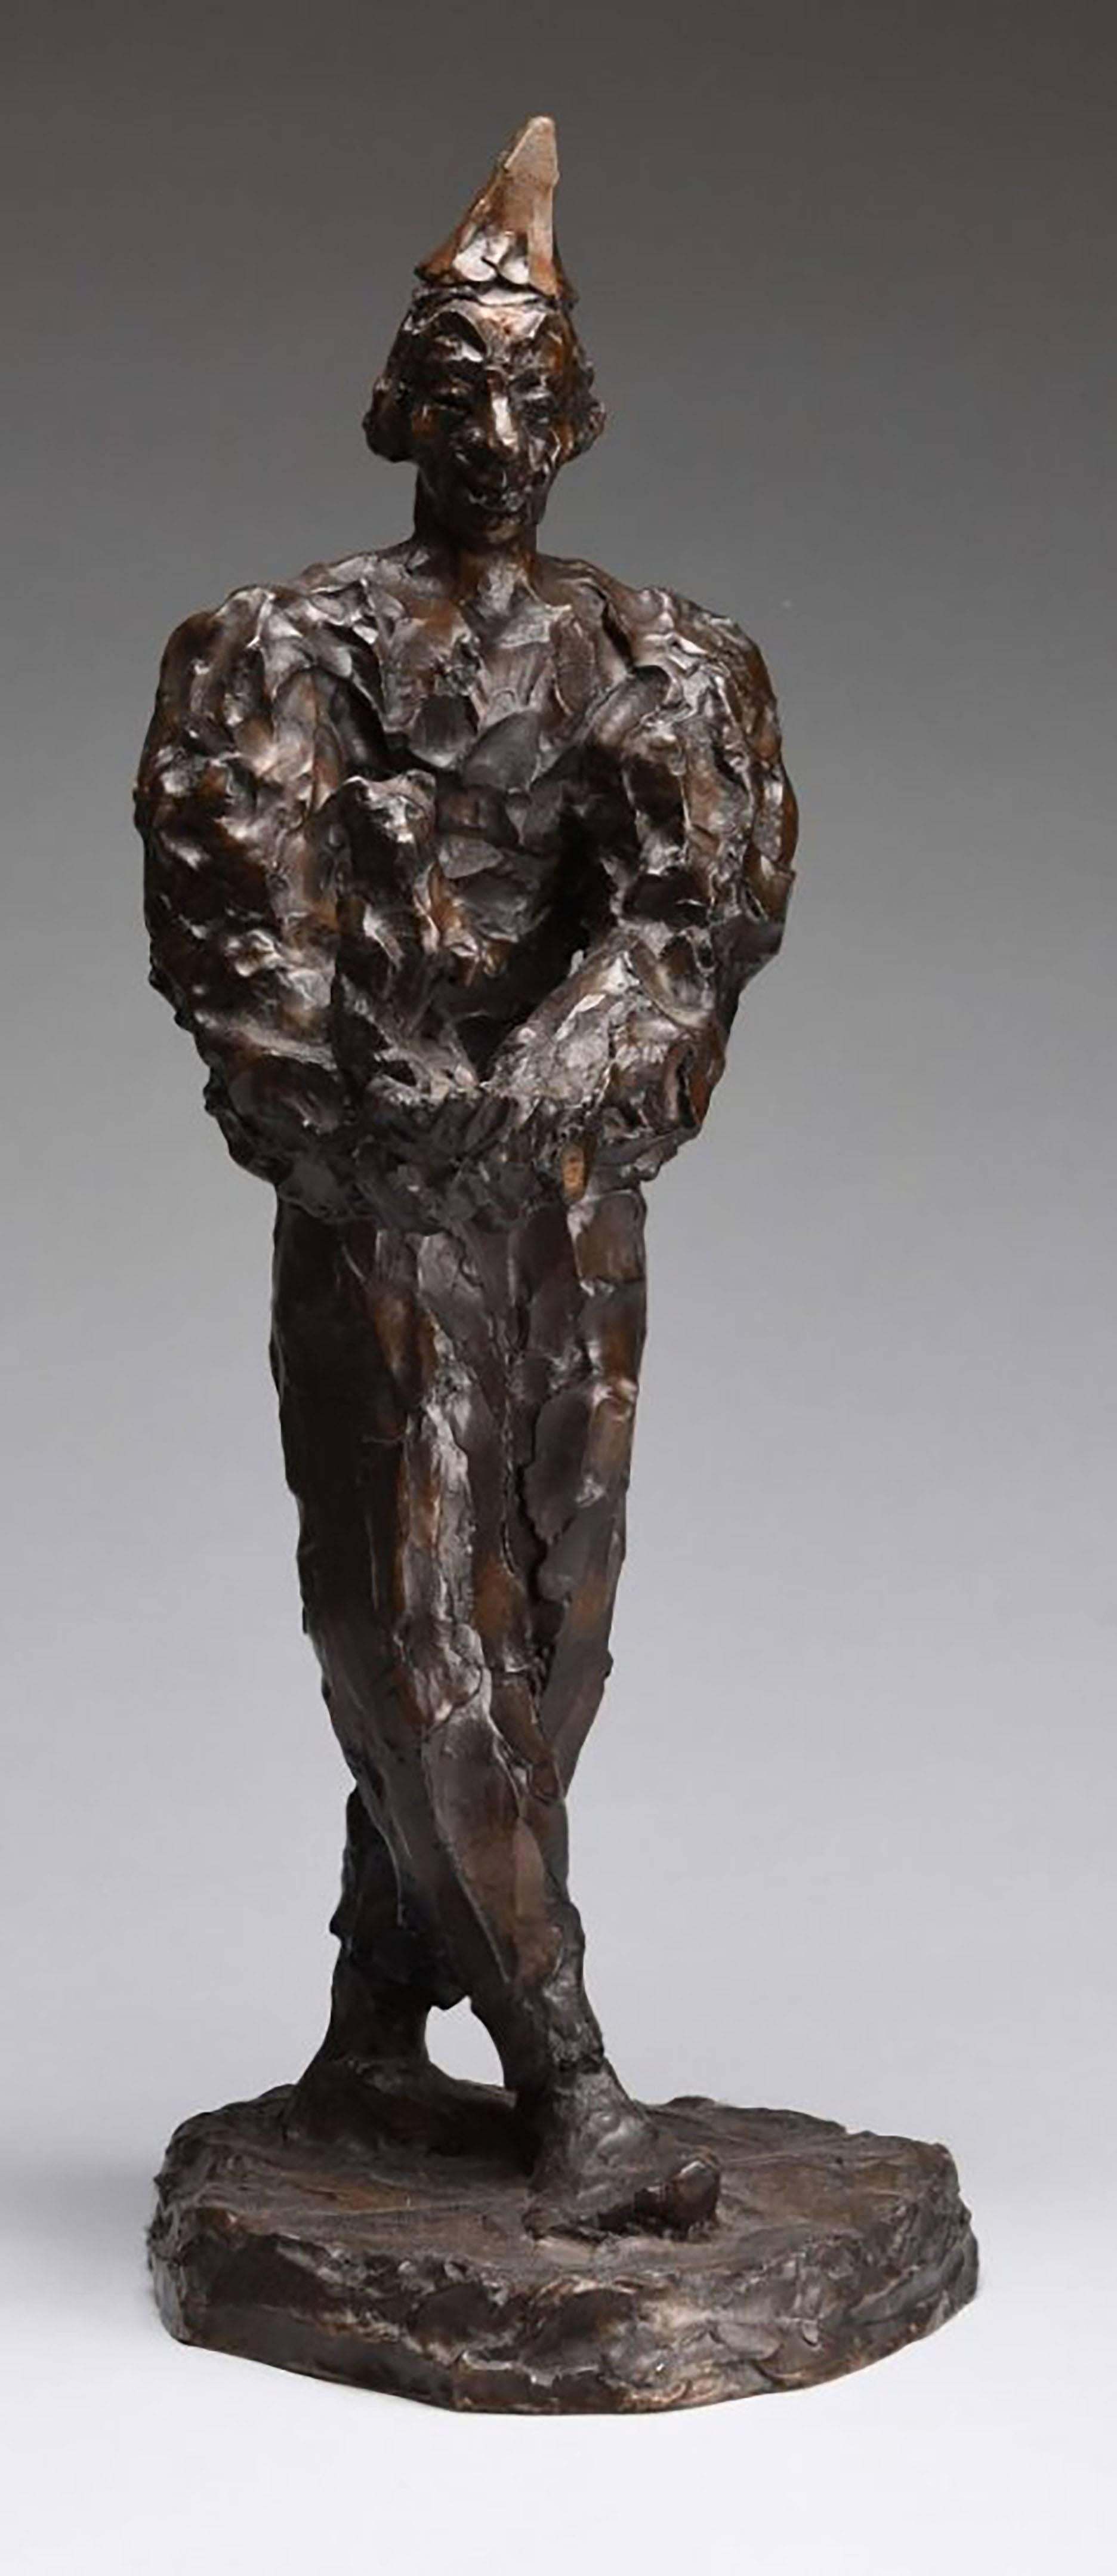 Clown Holding Teddy Bear, Unique Bronze Expressionist Sculpture - Gold Figurative Sculpture by Agnes Yarnall